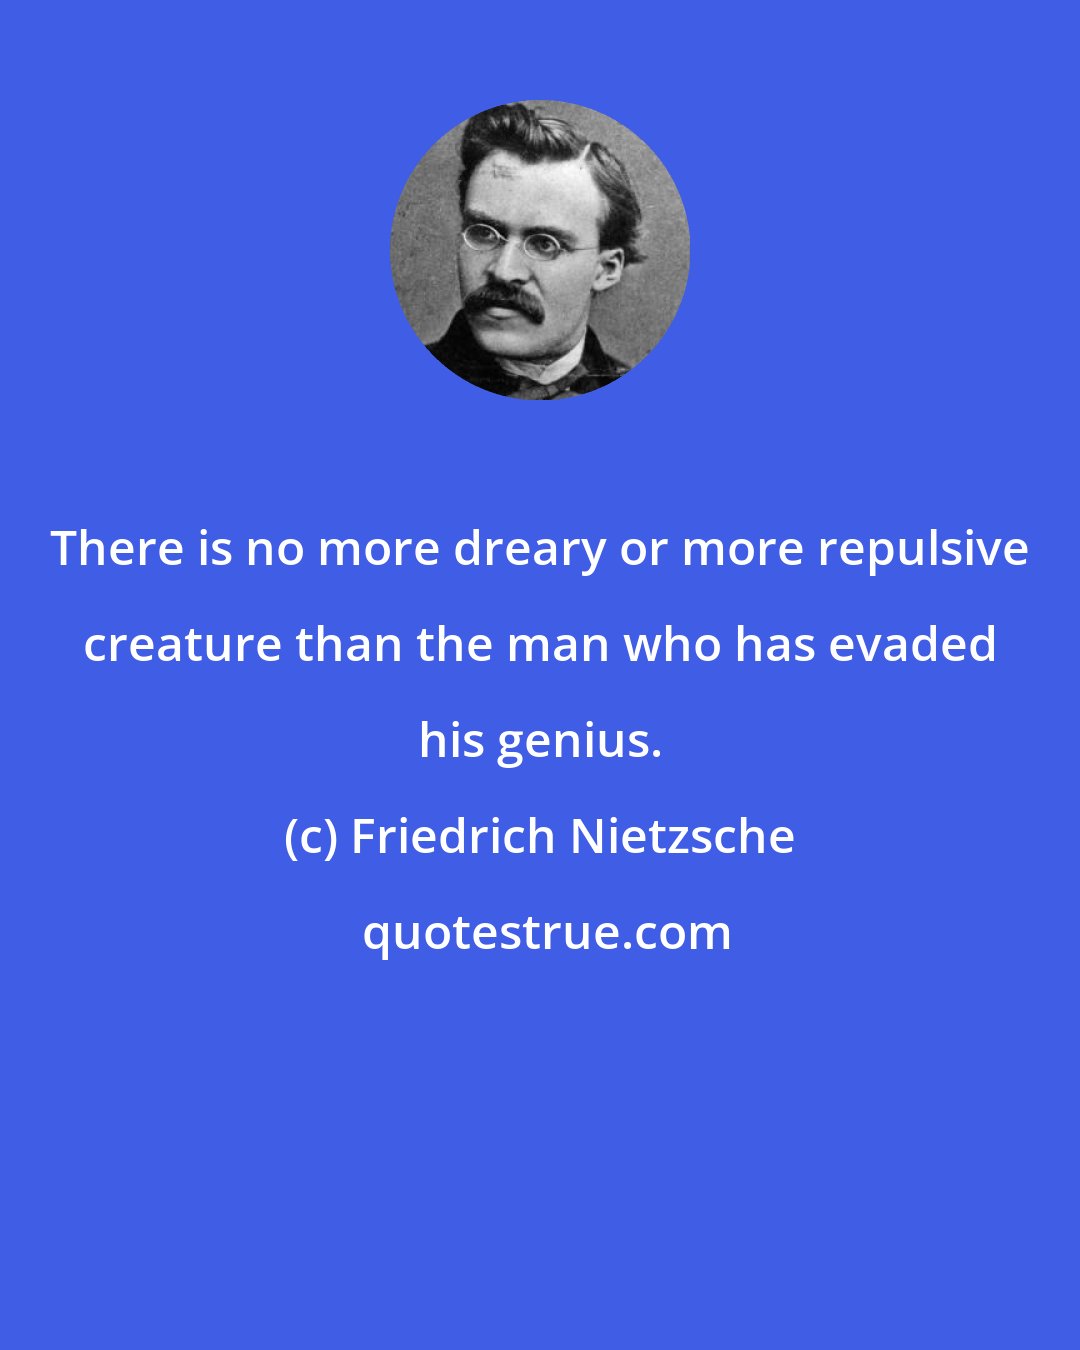 Friedrich Nietzsche: There is no more dreary or more repulsive creature than the man who has evaded his genius.